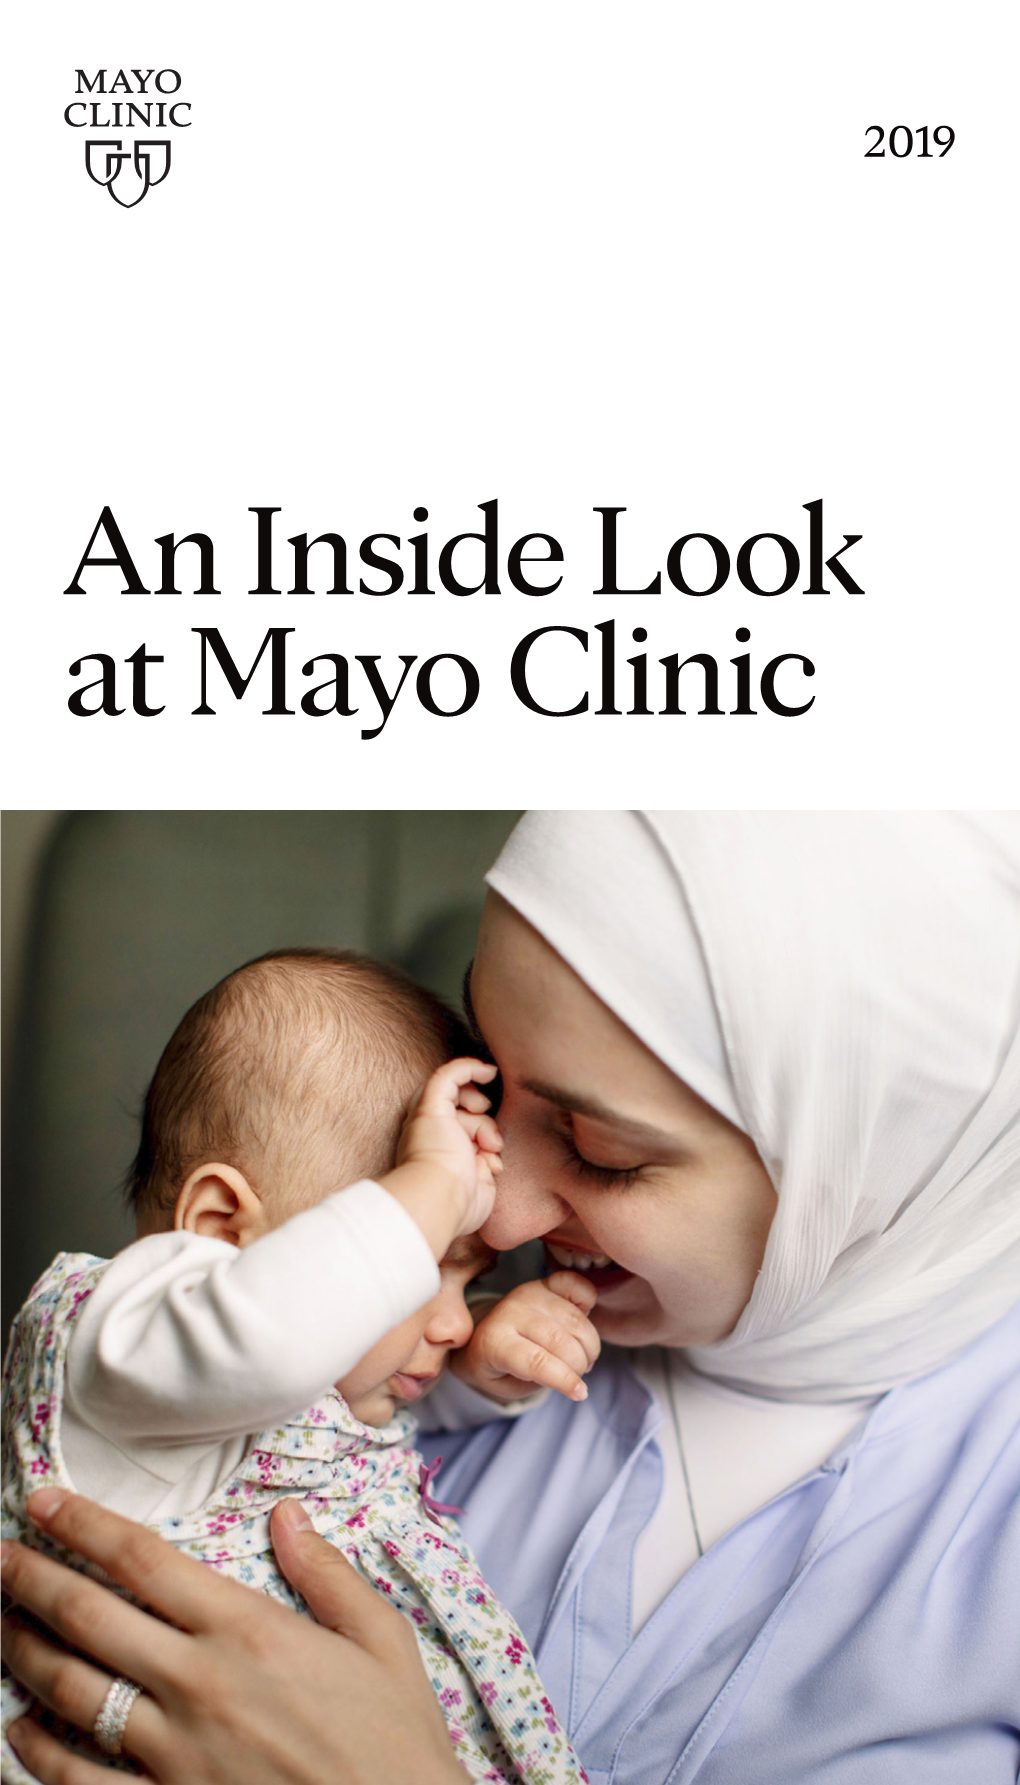 An Inside Look at Mayo Clinic